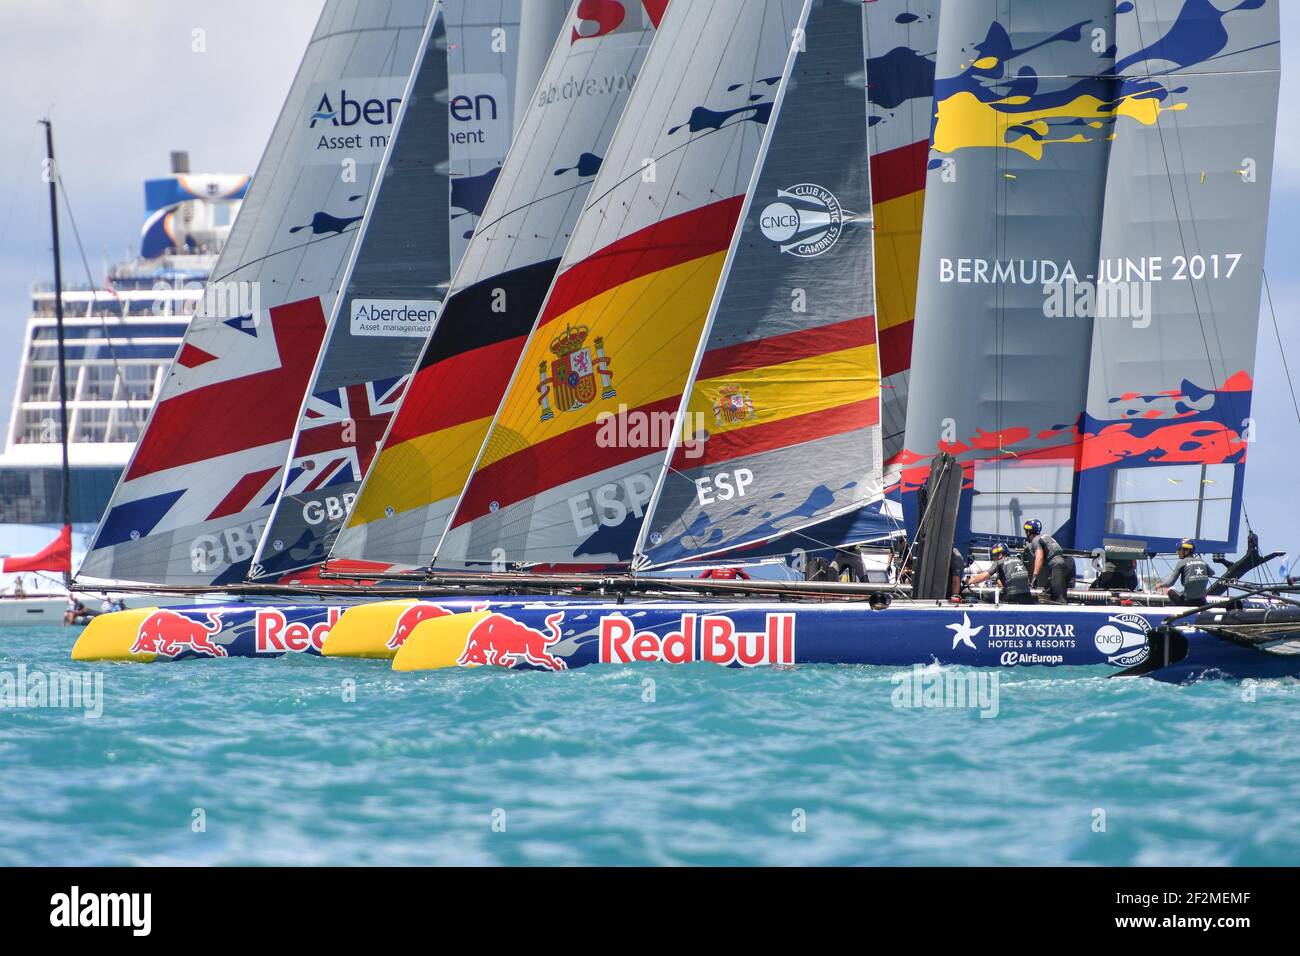 SVB Team Germany, Land Rover Bar Academy (GBR), Spanish Impulse Team,  during the Red Bull Youth America's Cup Finals, June 20th, 2017, in  Hamilton, Bermuda, Photo Christophe Favreau / DPPI Stock Photo - Alamy